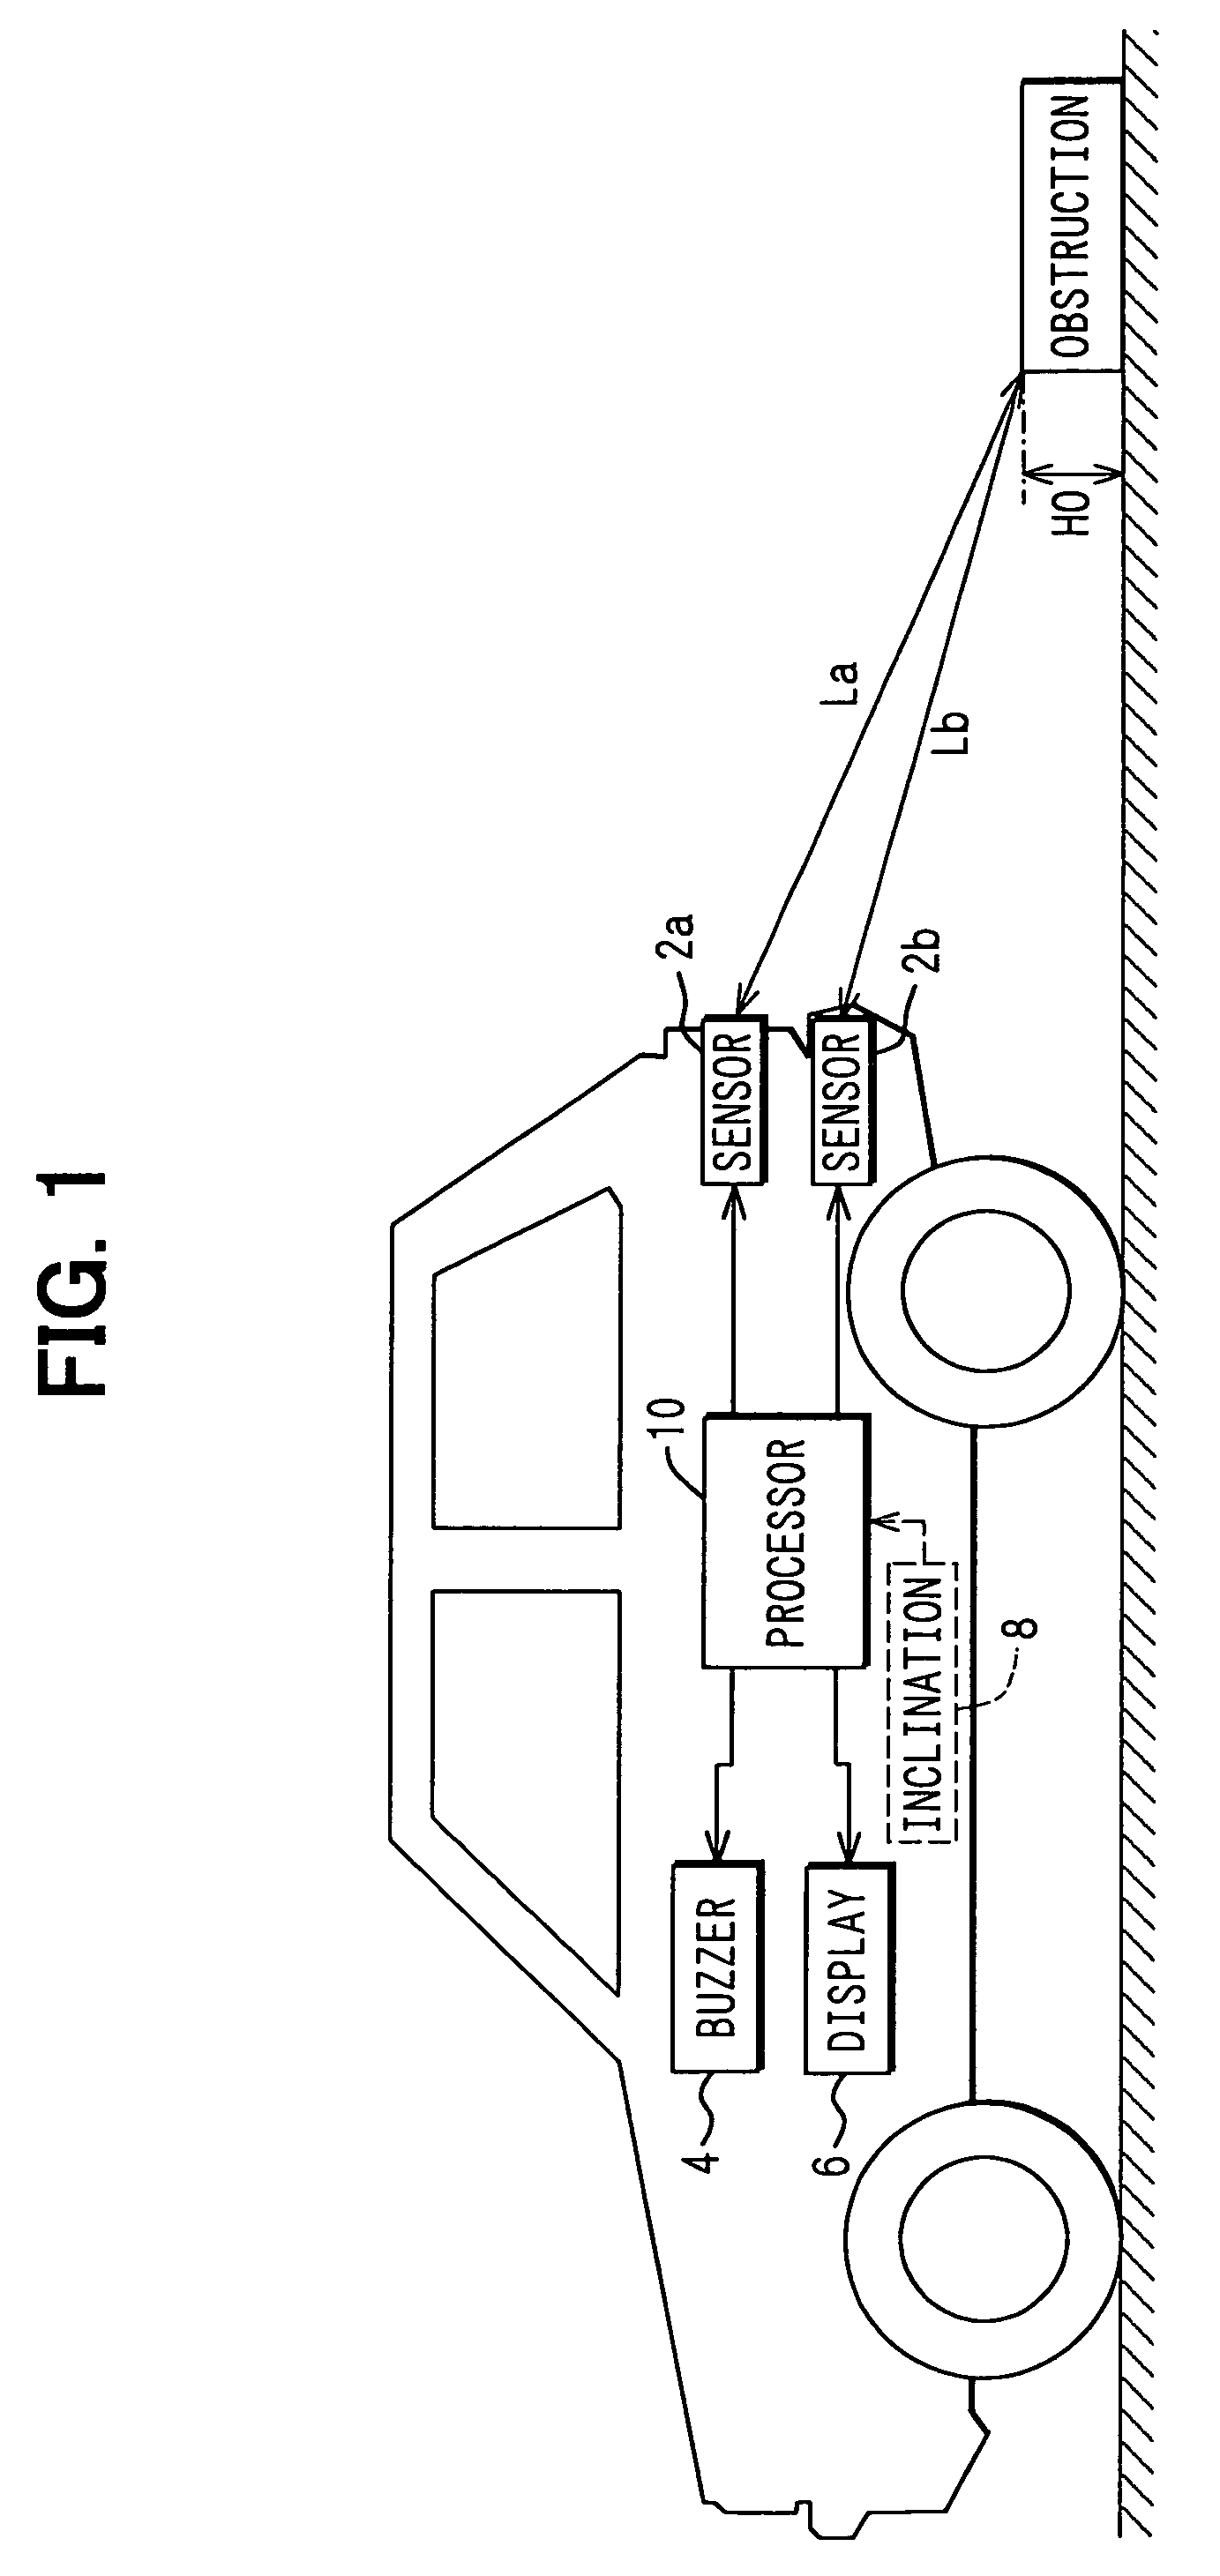 Driving assisting apparatus for vehicles